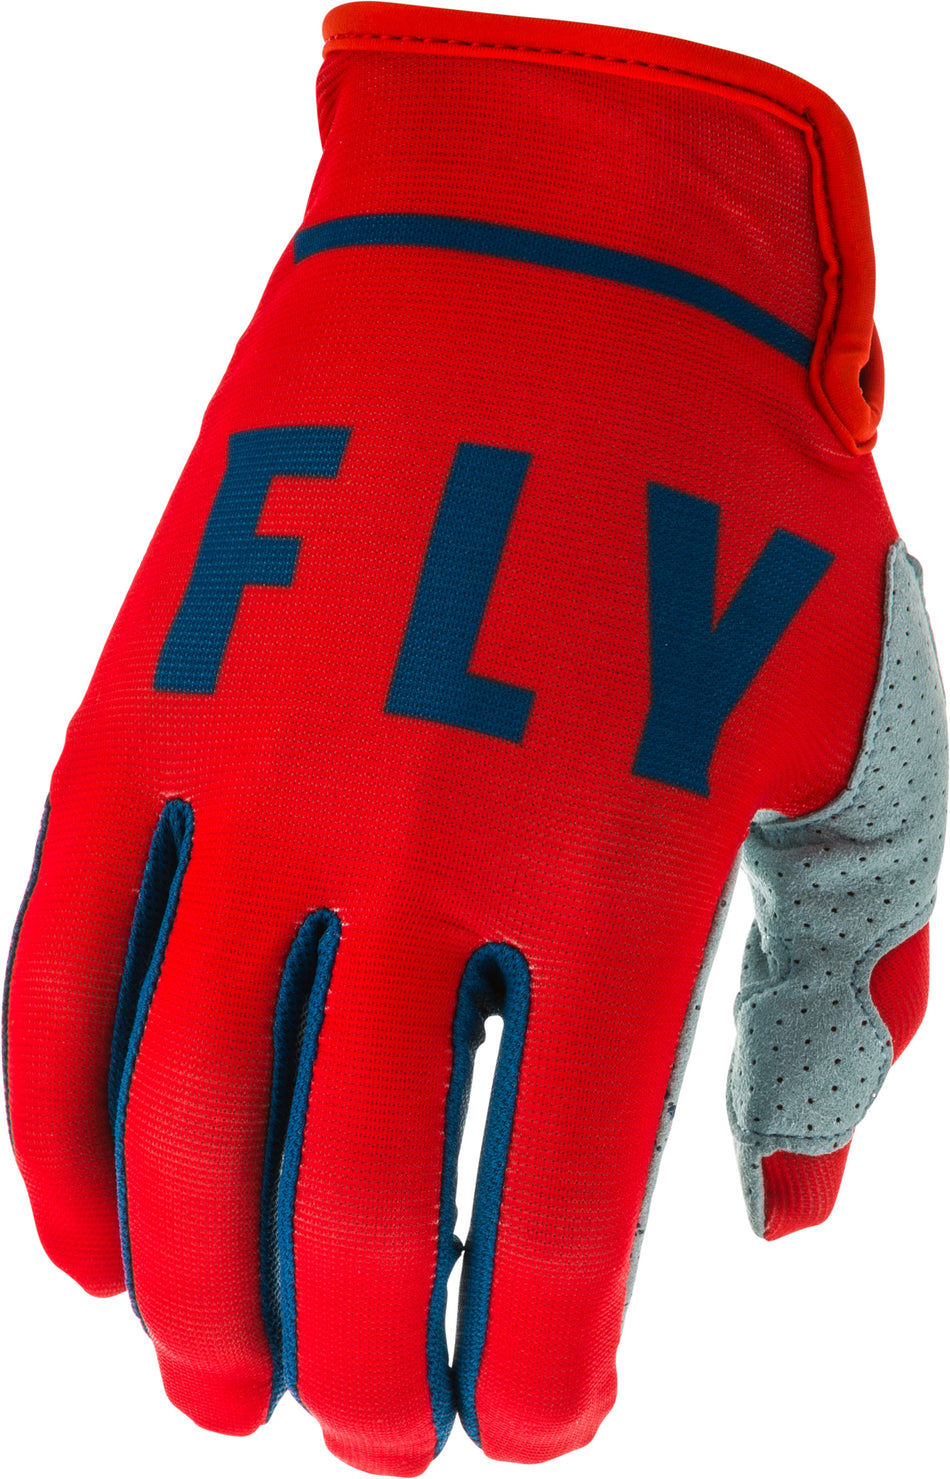 FLY RACING Lite Gloves Red/Slate/Navy Sz 11 373-71211